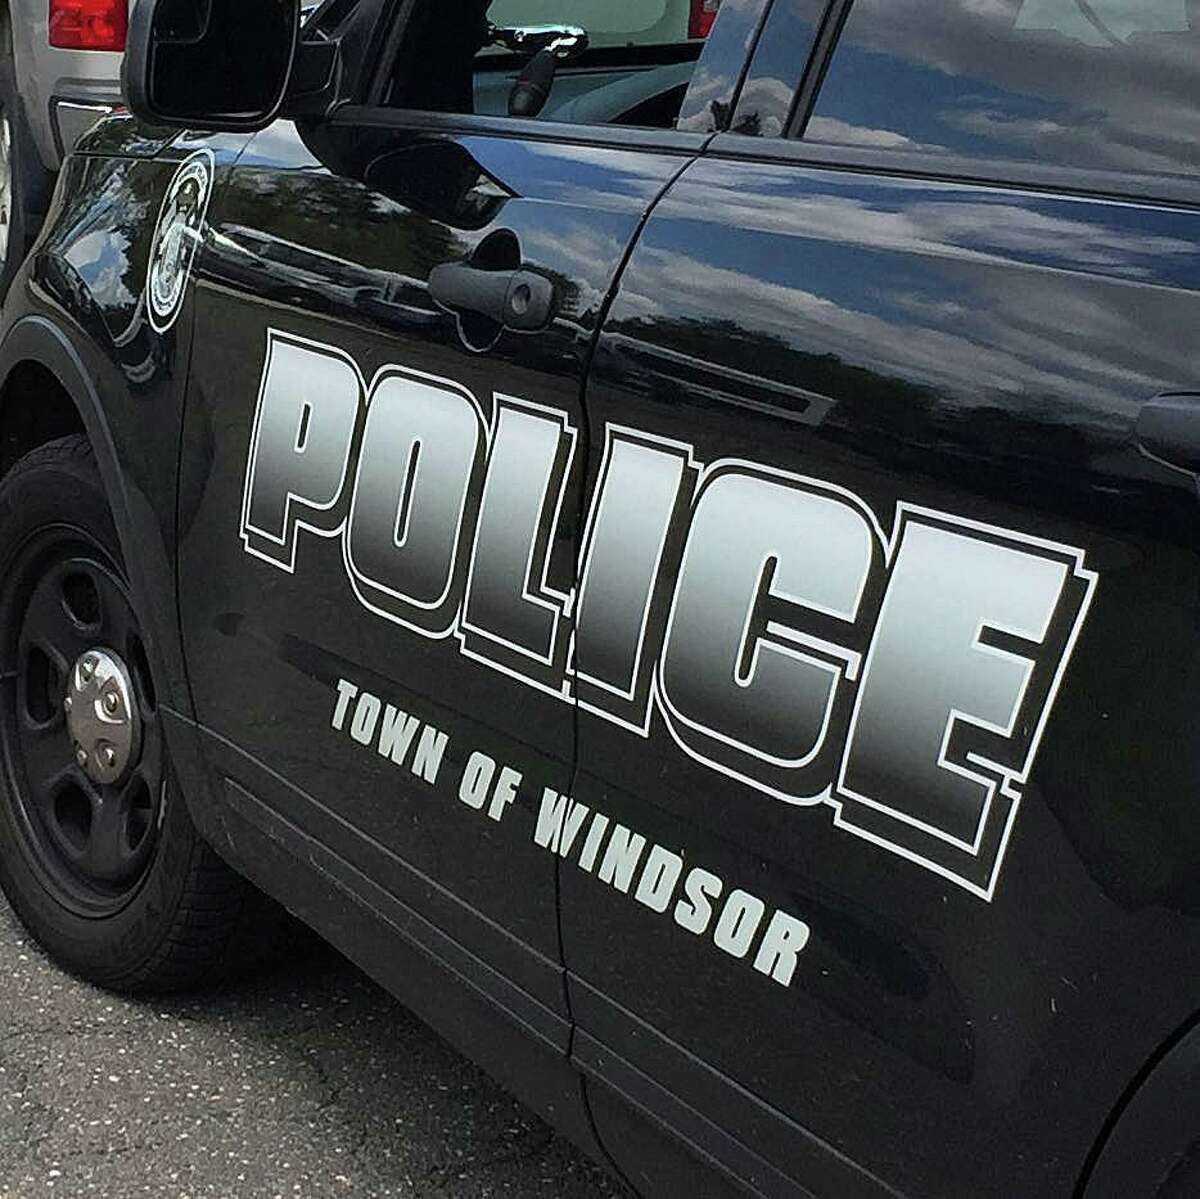 Authorities said the operator of the vehicle, who was pulled out by Windsor, Conn., first responders, was the only person in the car. The driver was pronounced dead at the scene on Friday, March 11, 2022.